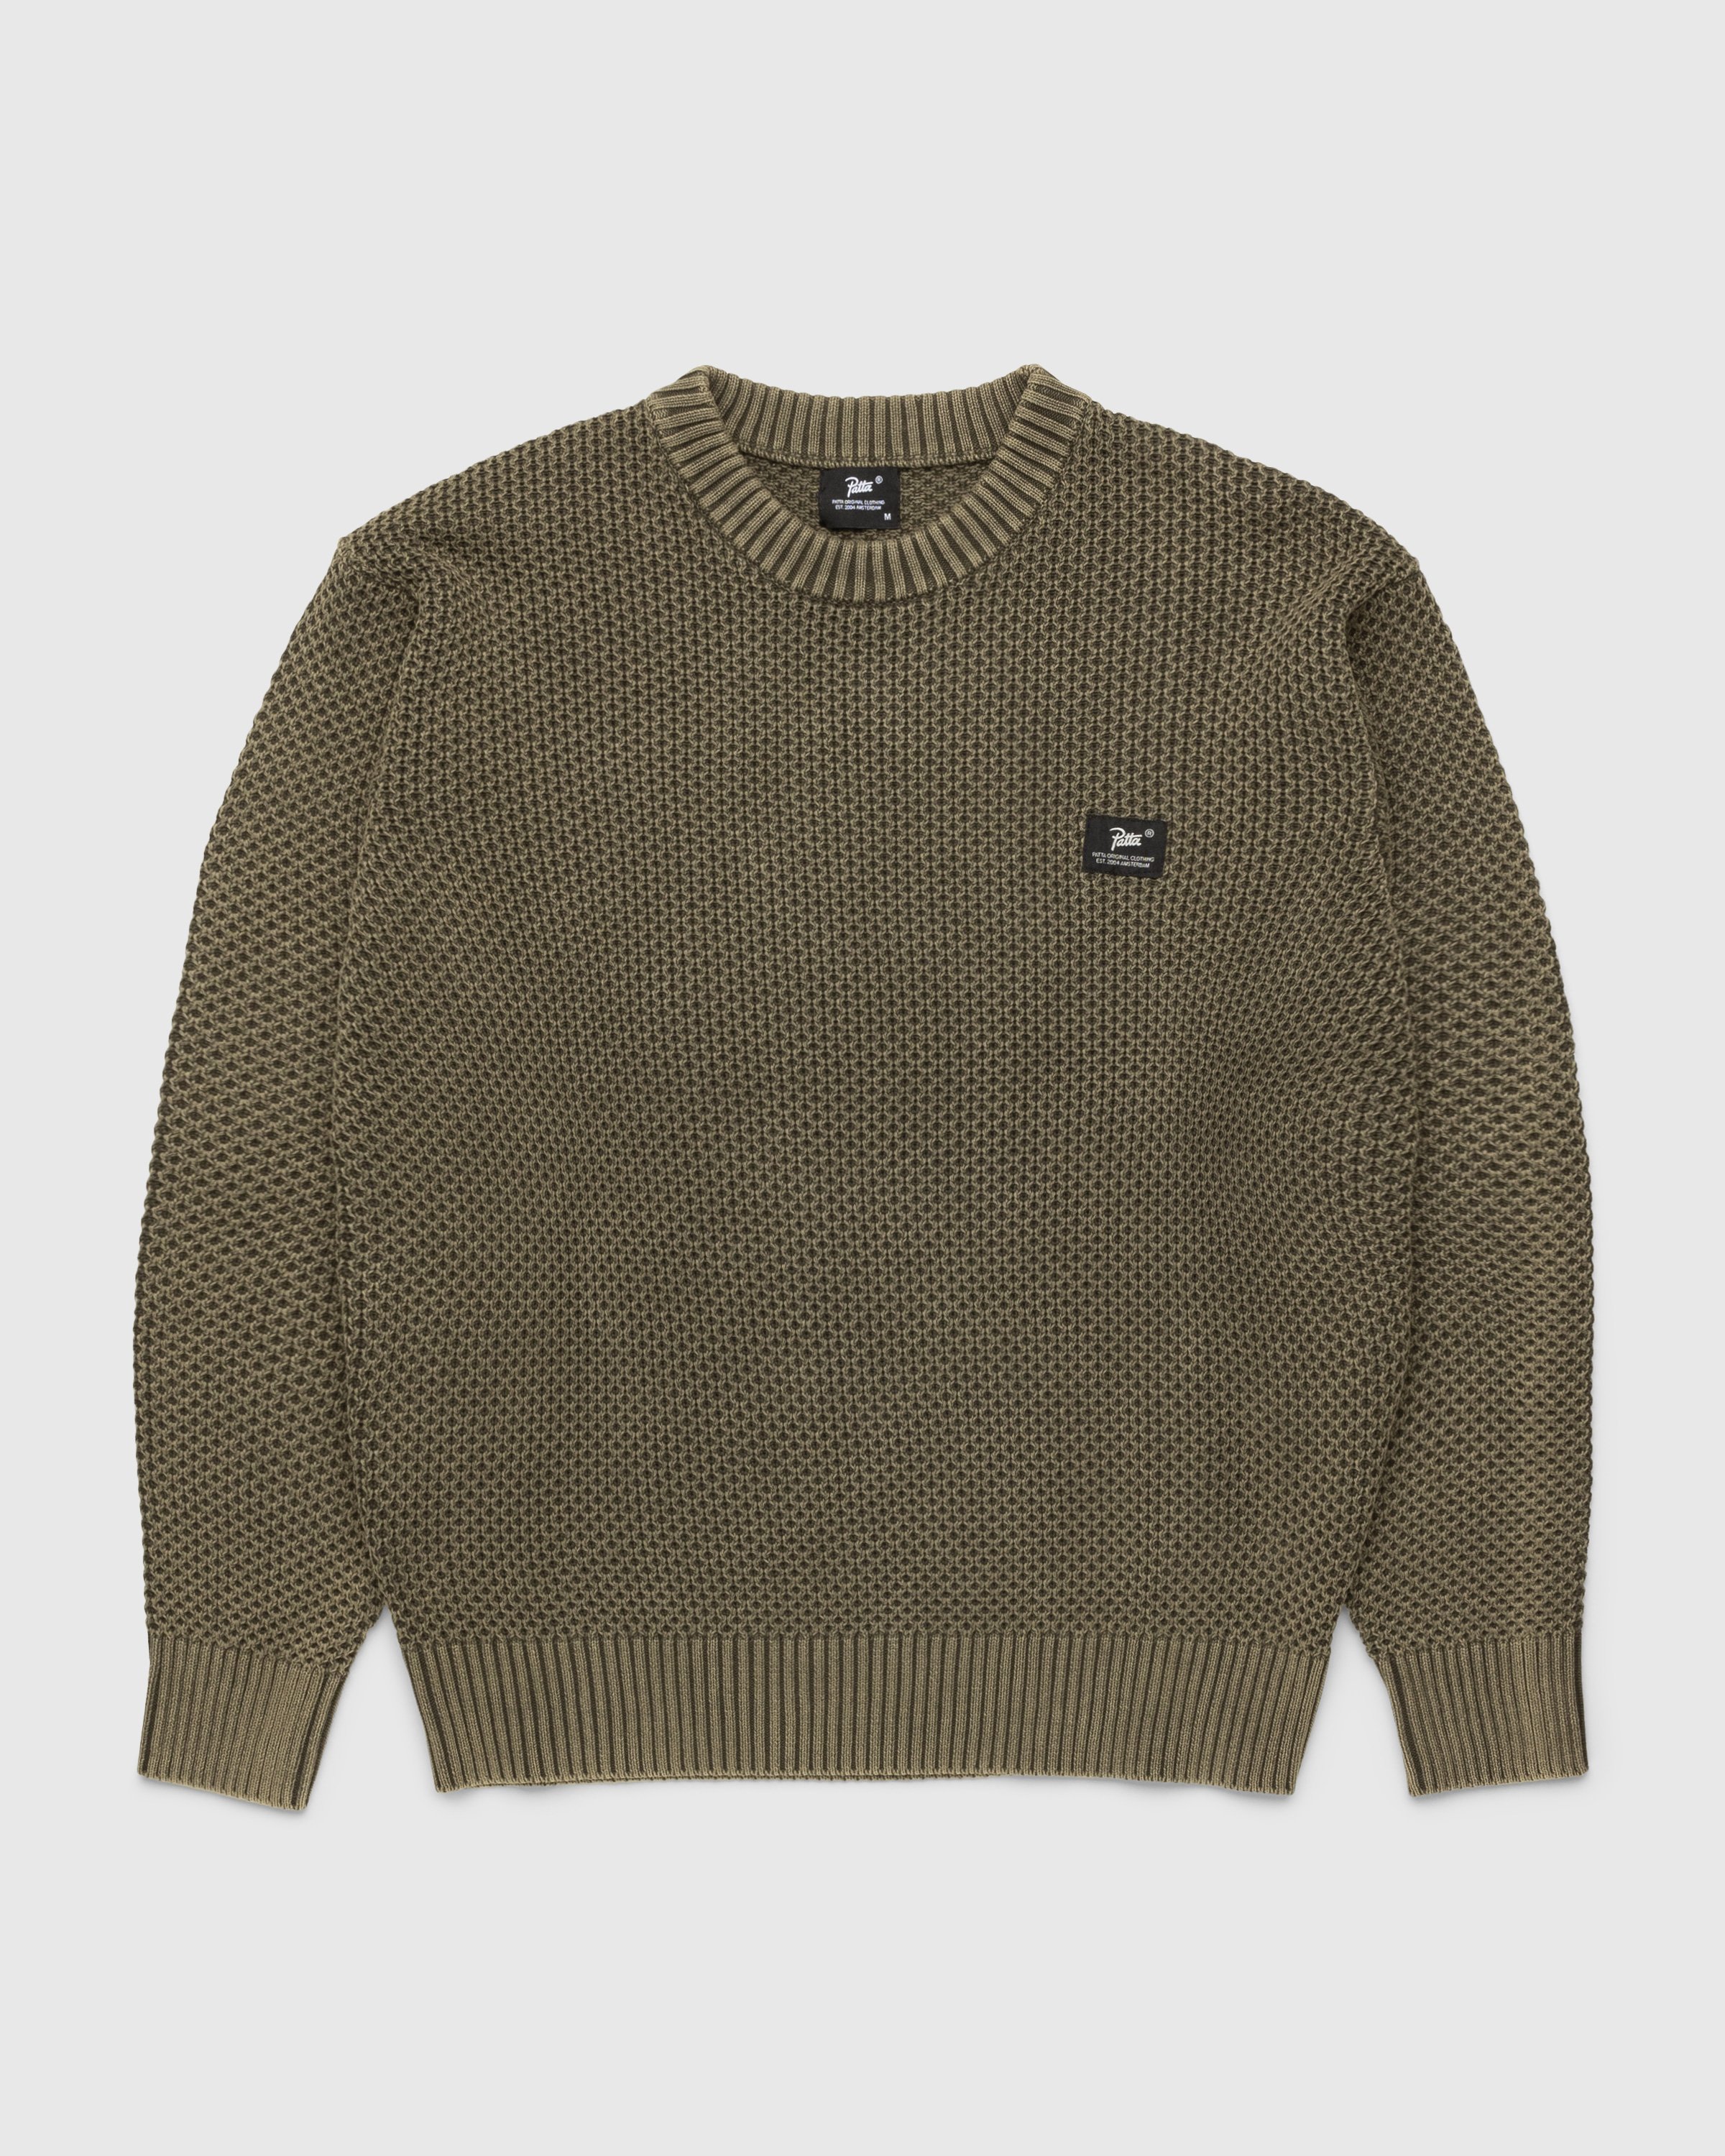 Patta - Honeycomb Knitted Sweater - Clothing - Brown - Image 1